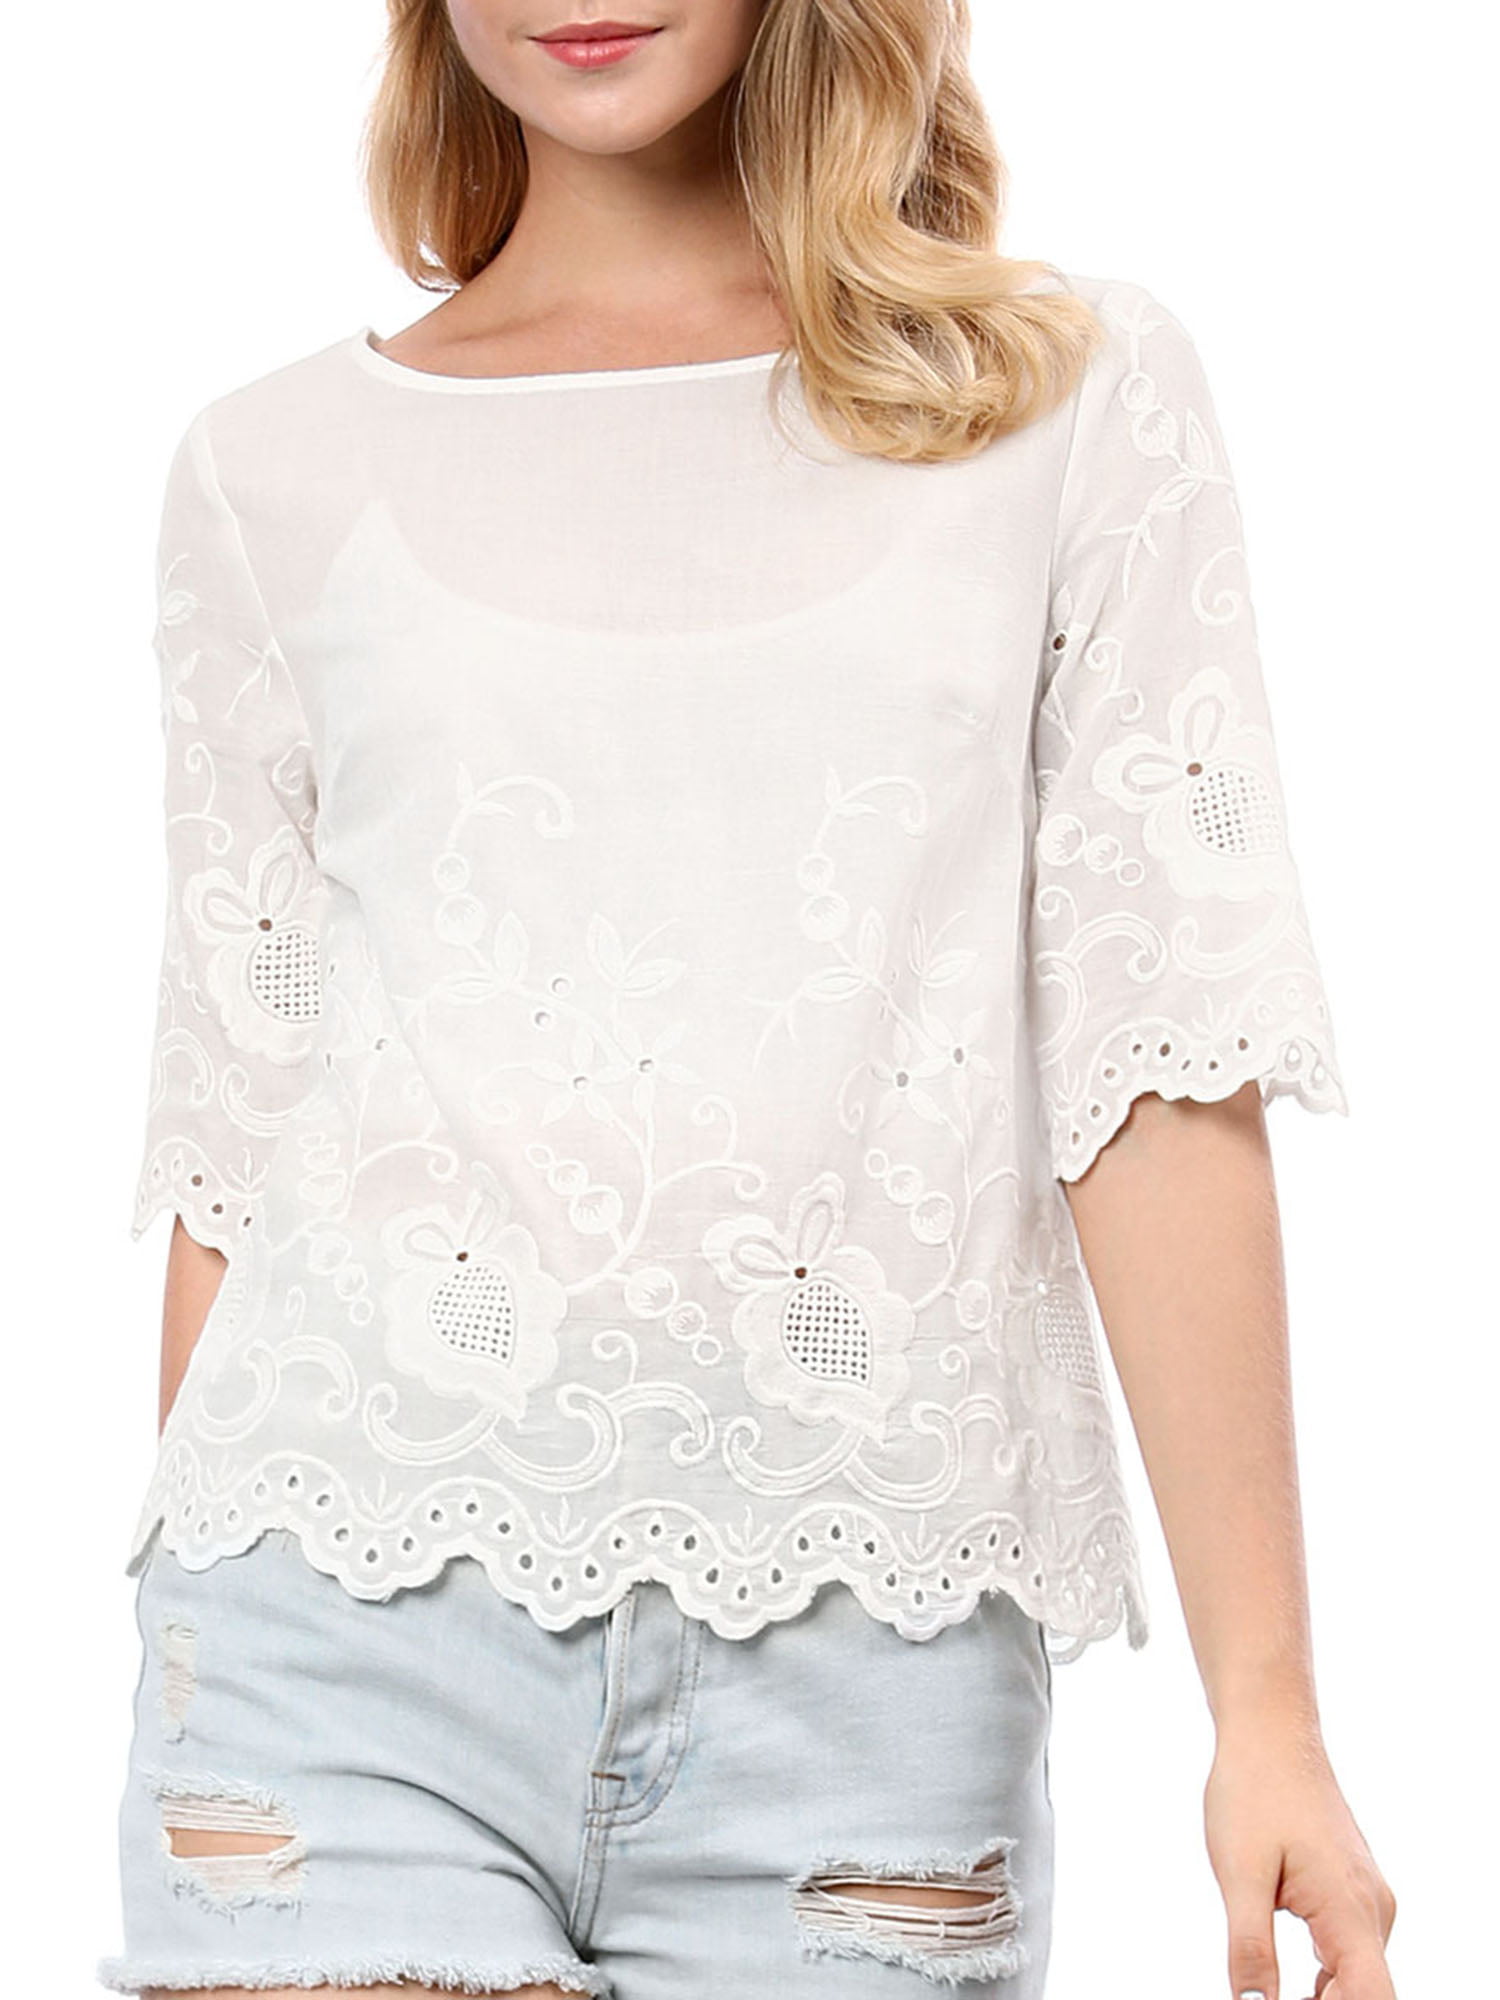 Unique Bargains - Women's Round Neck Elbow Sleeves Embroidery Blouse ...